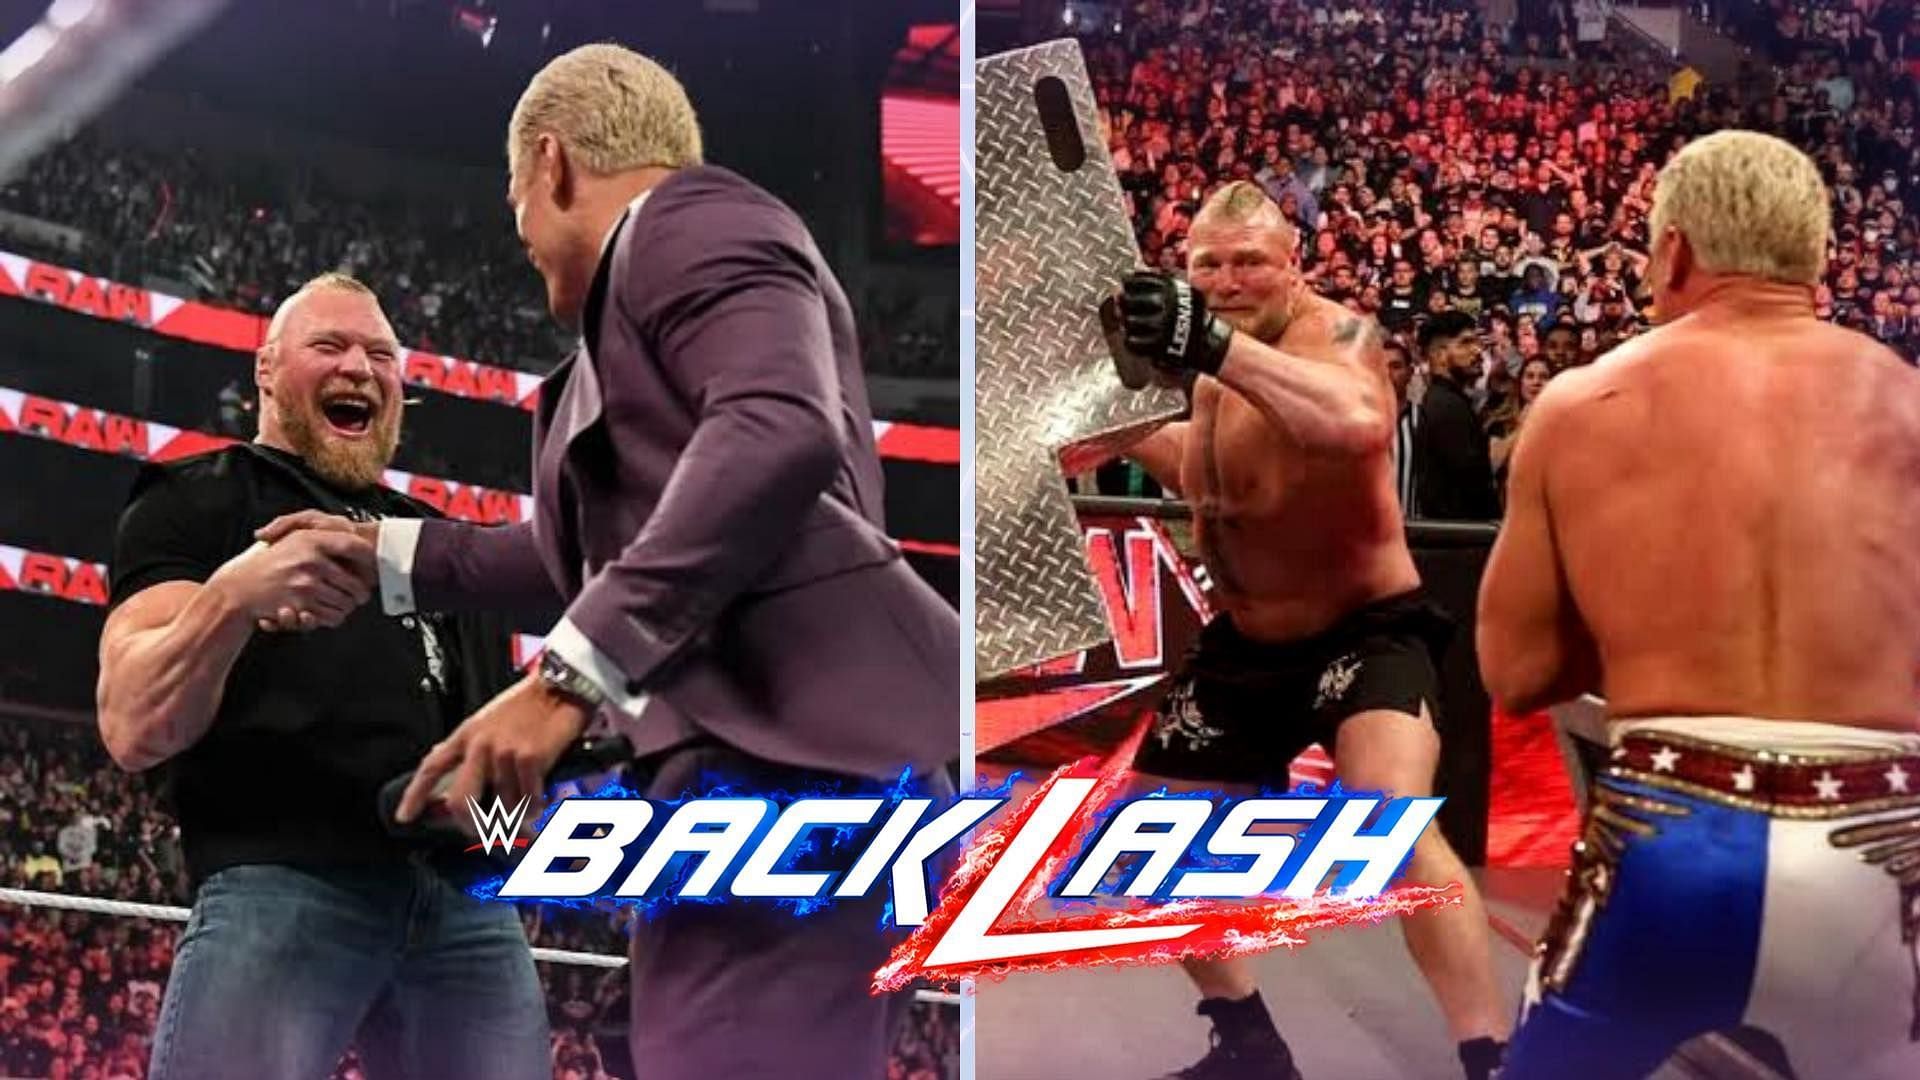 WWE Superstars Cody Rhodes and Brock Lesnar are in a collision course at this year